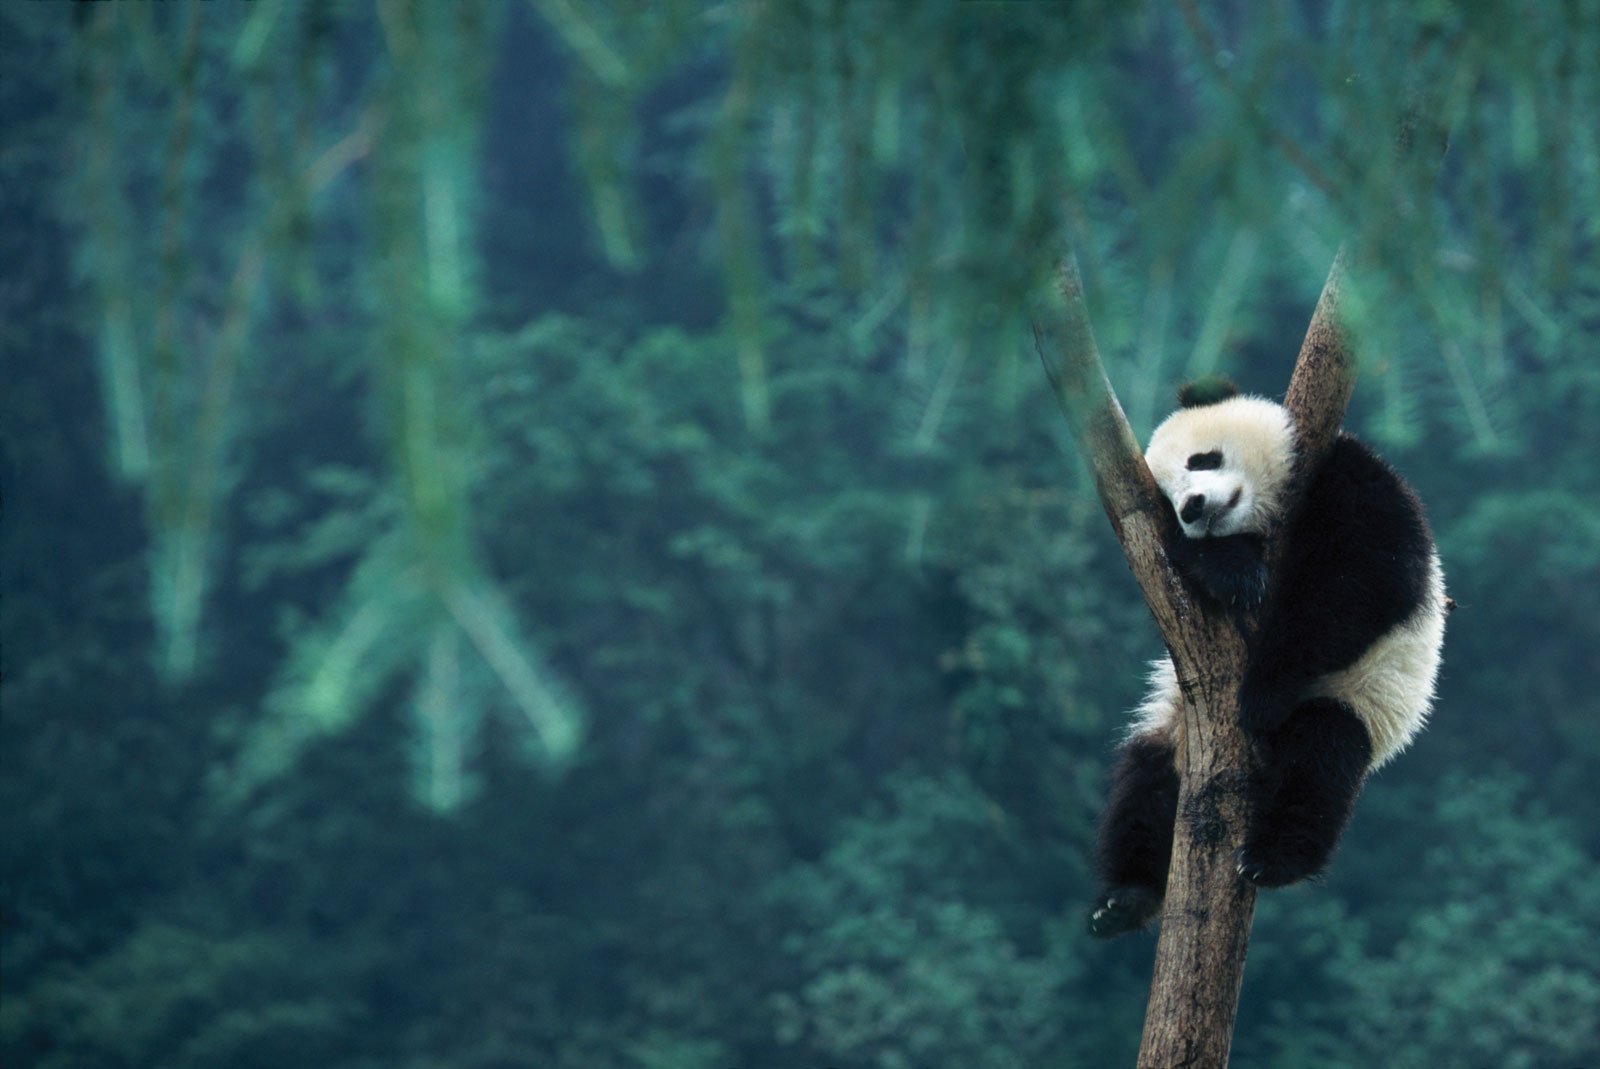 Chinese Panda conservation efforts aiding other species